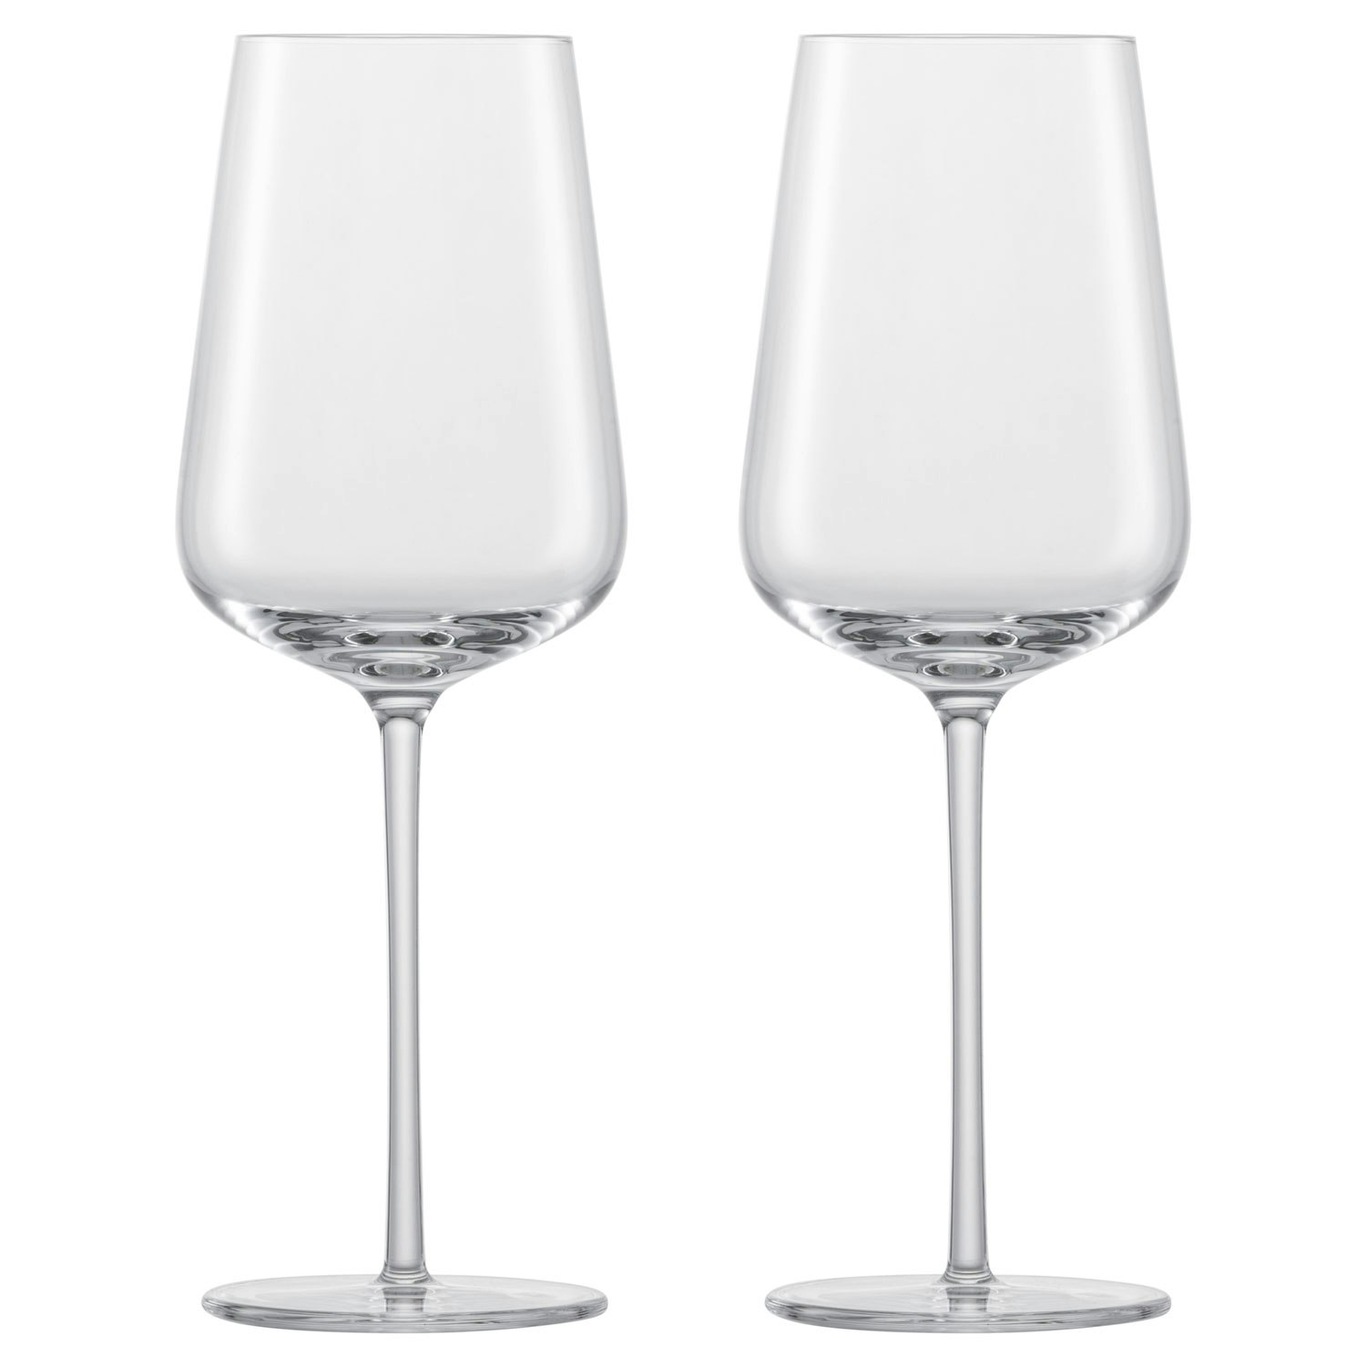 https://royaldesign.com/image/2/zwiesel-vervino-riesling-white-wine-glass-40-cl-2-pack-0?w=800&quality=80